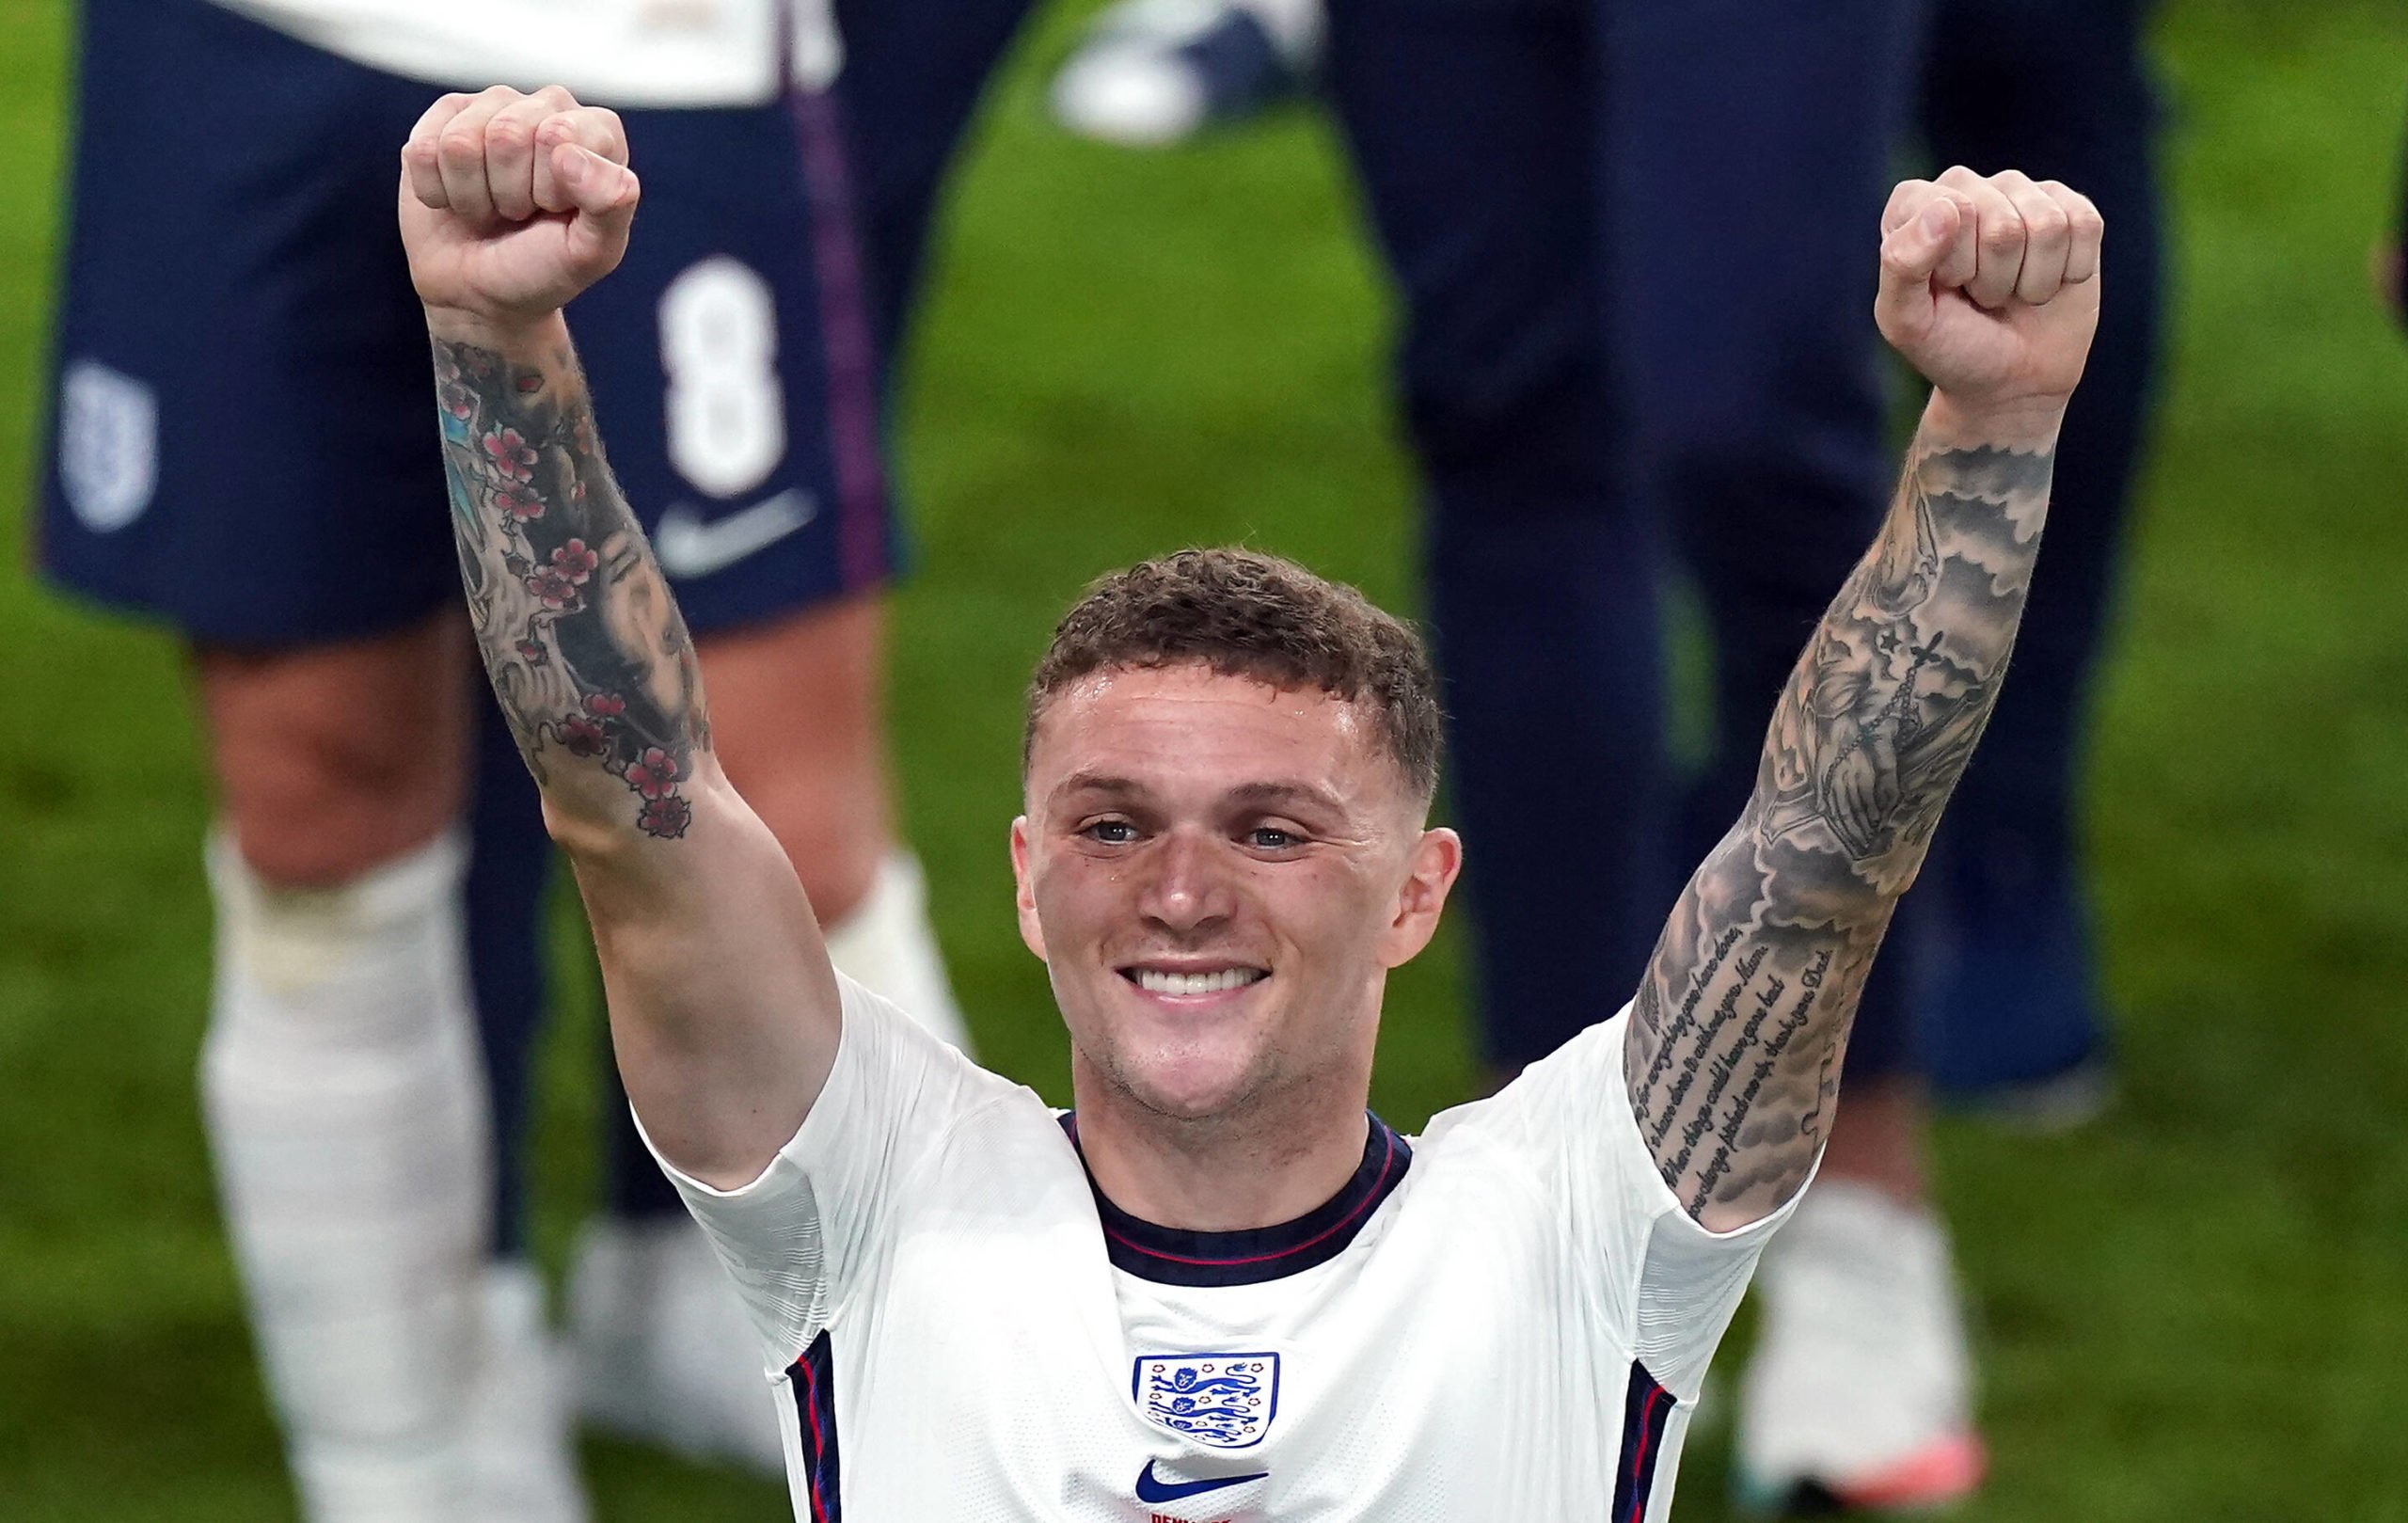 Trippier remains keen on joining Manchester United (Trippier is seen in the picture)